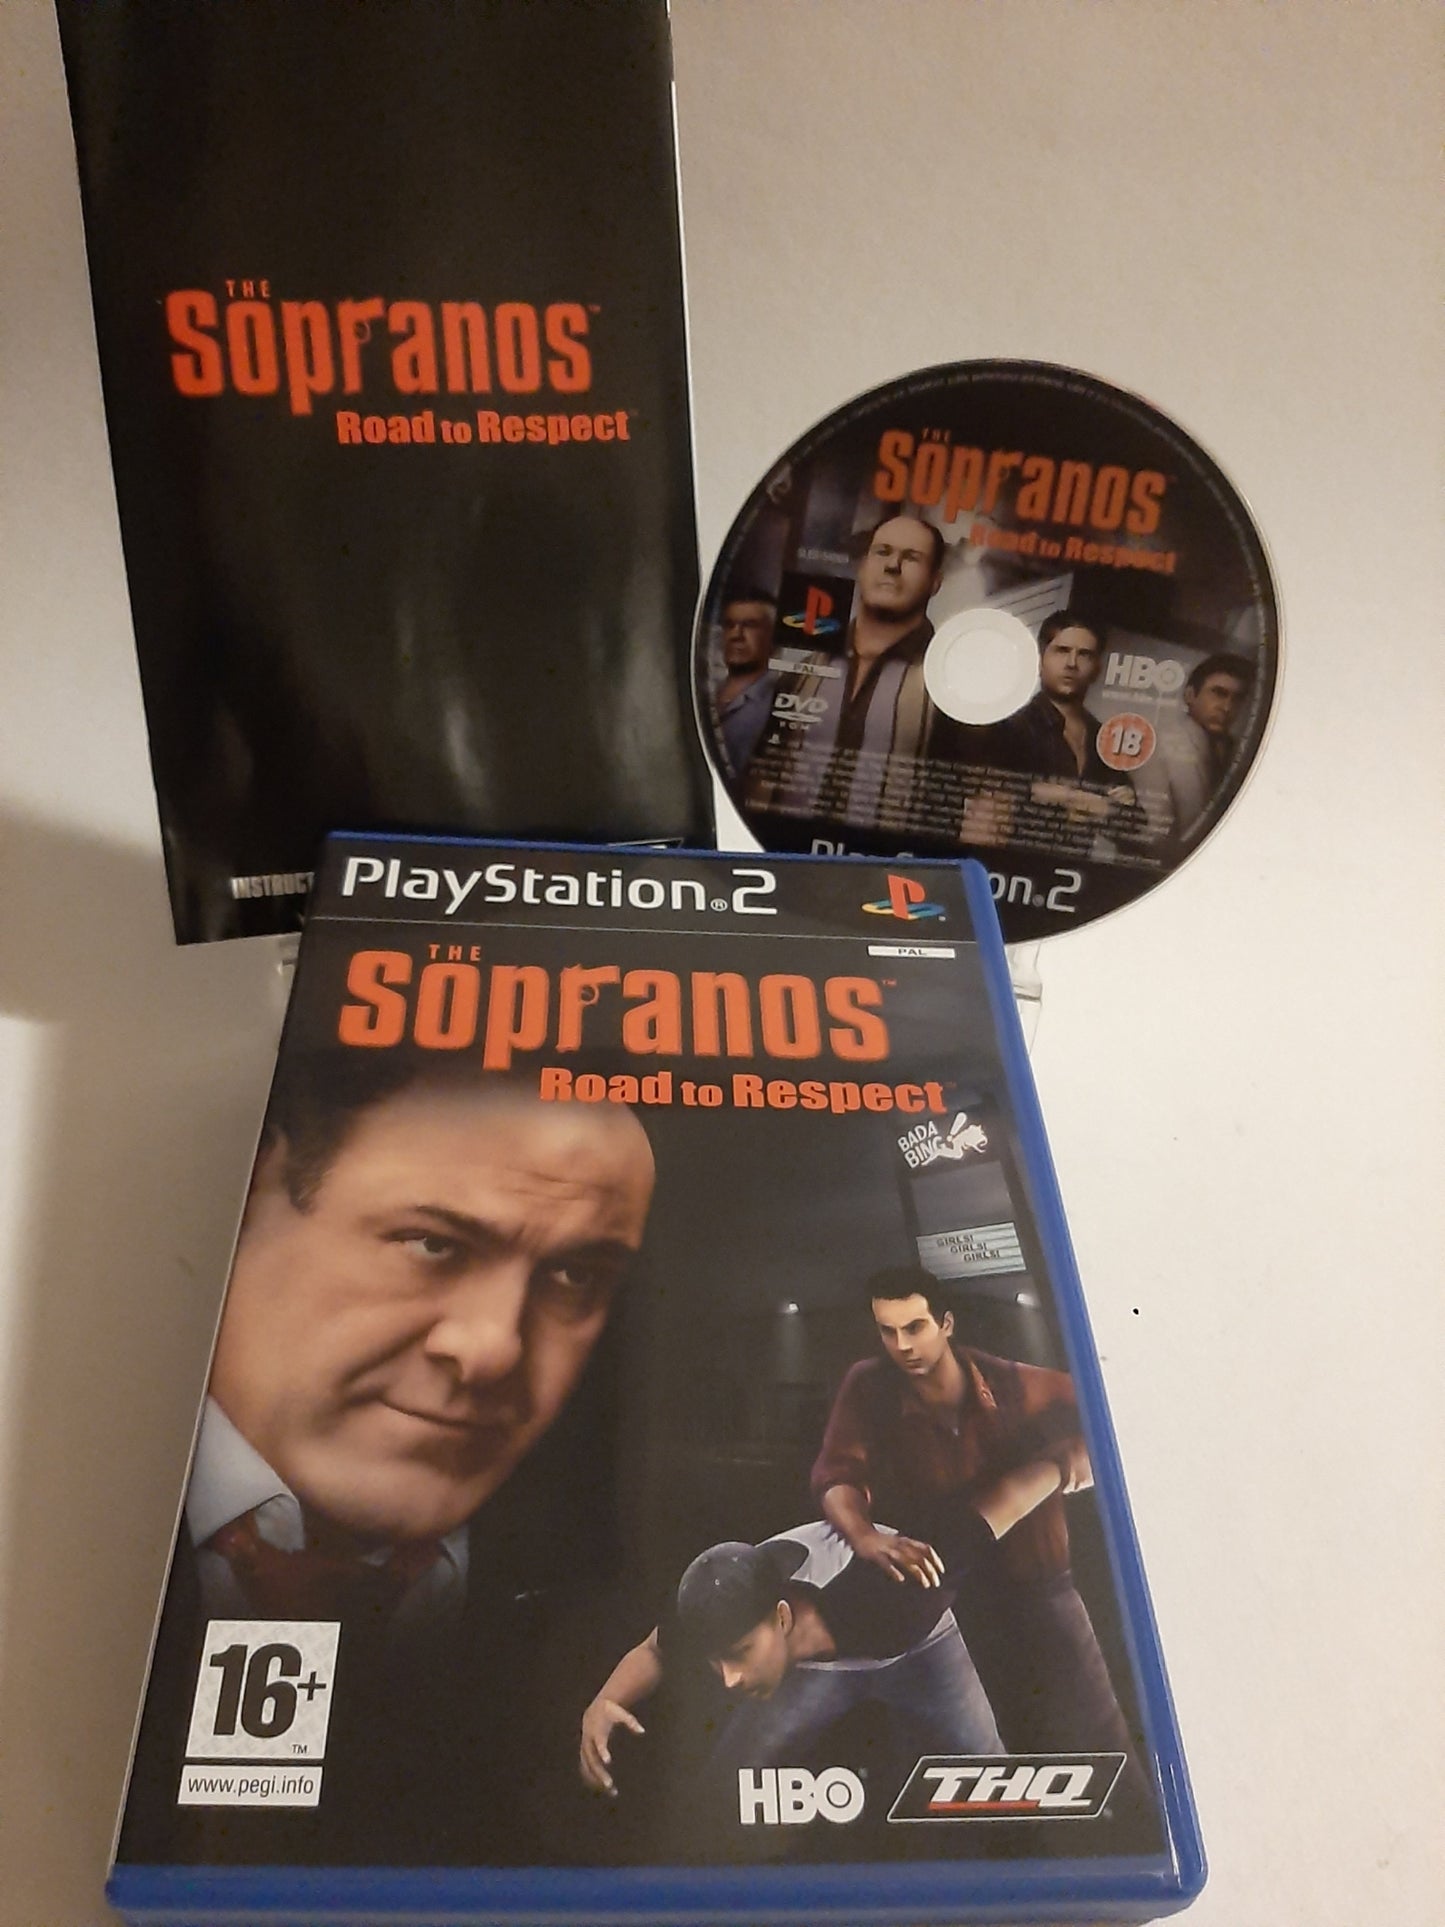 The Sopranos, Road to Respect Playstation 2